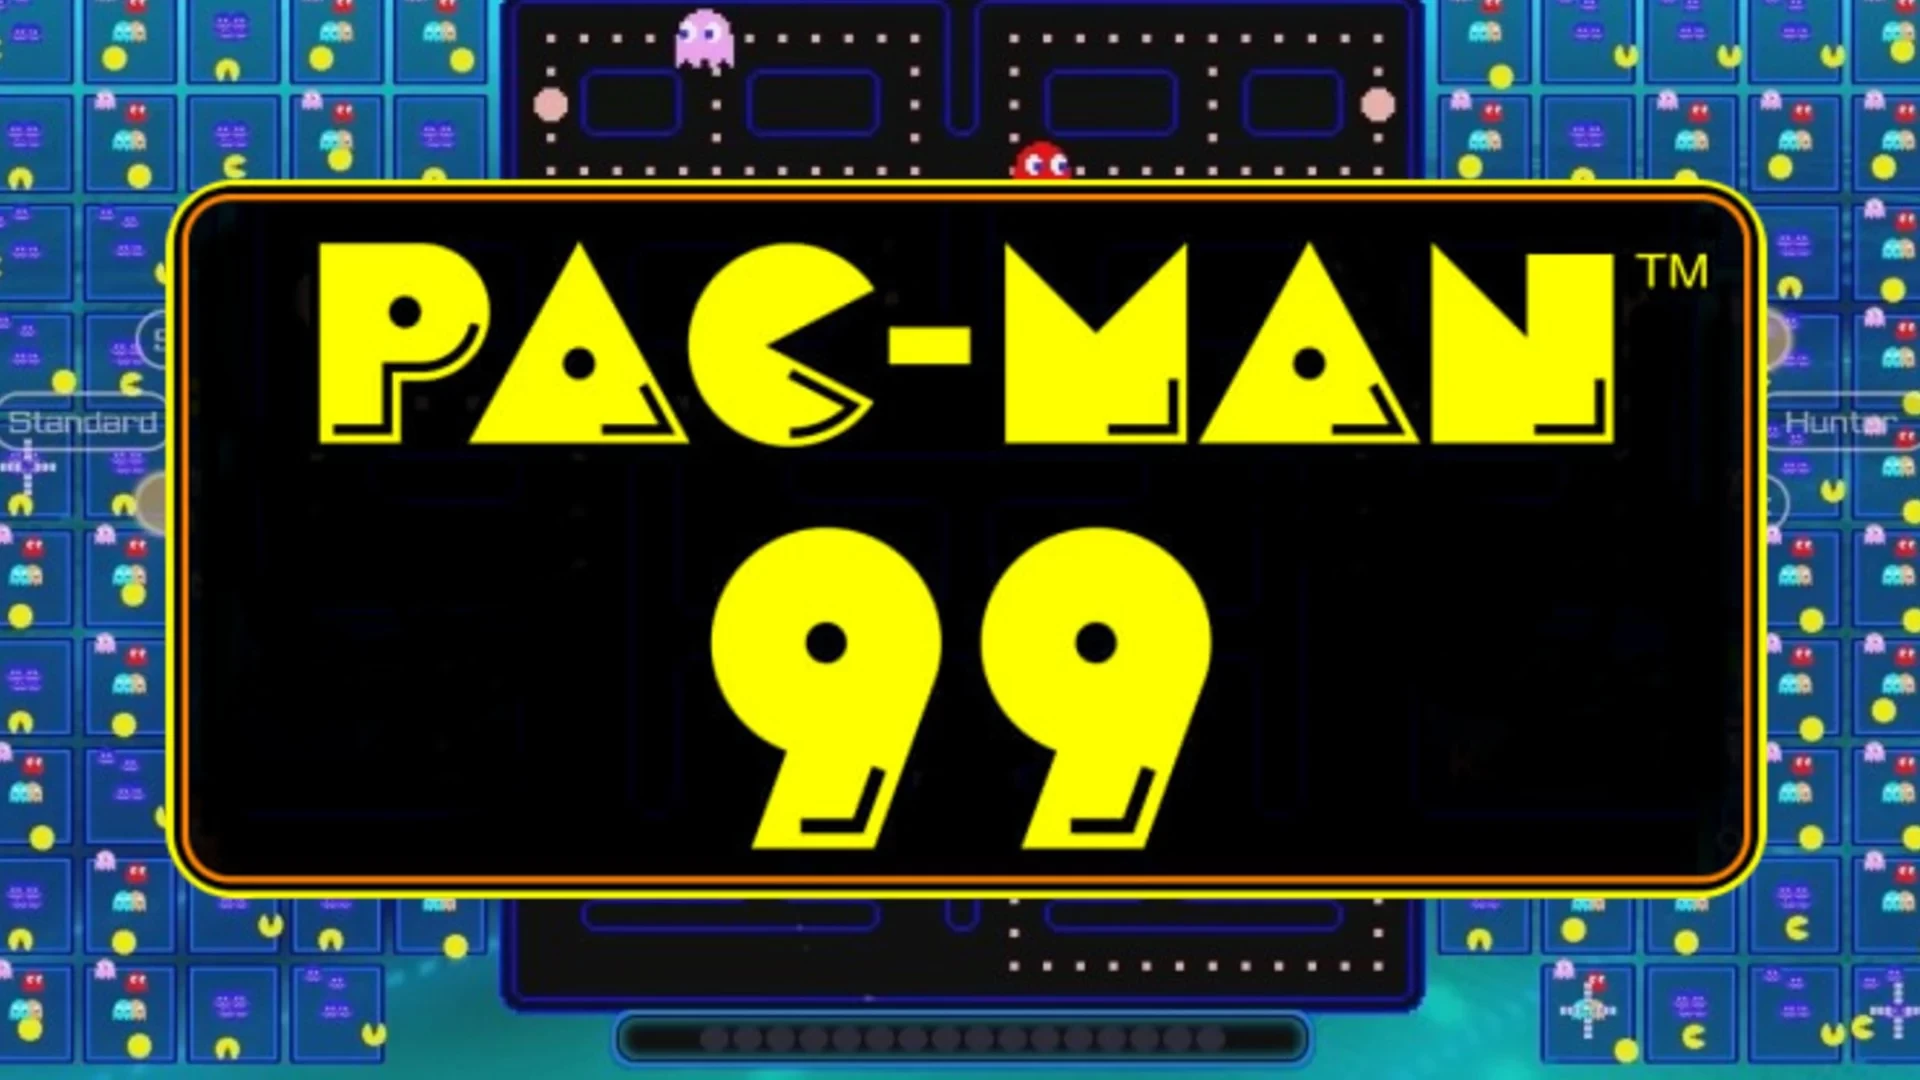 Pac-Man 99: A new battle royale game for Nintendo Switch